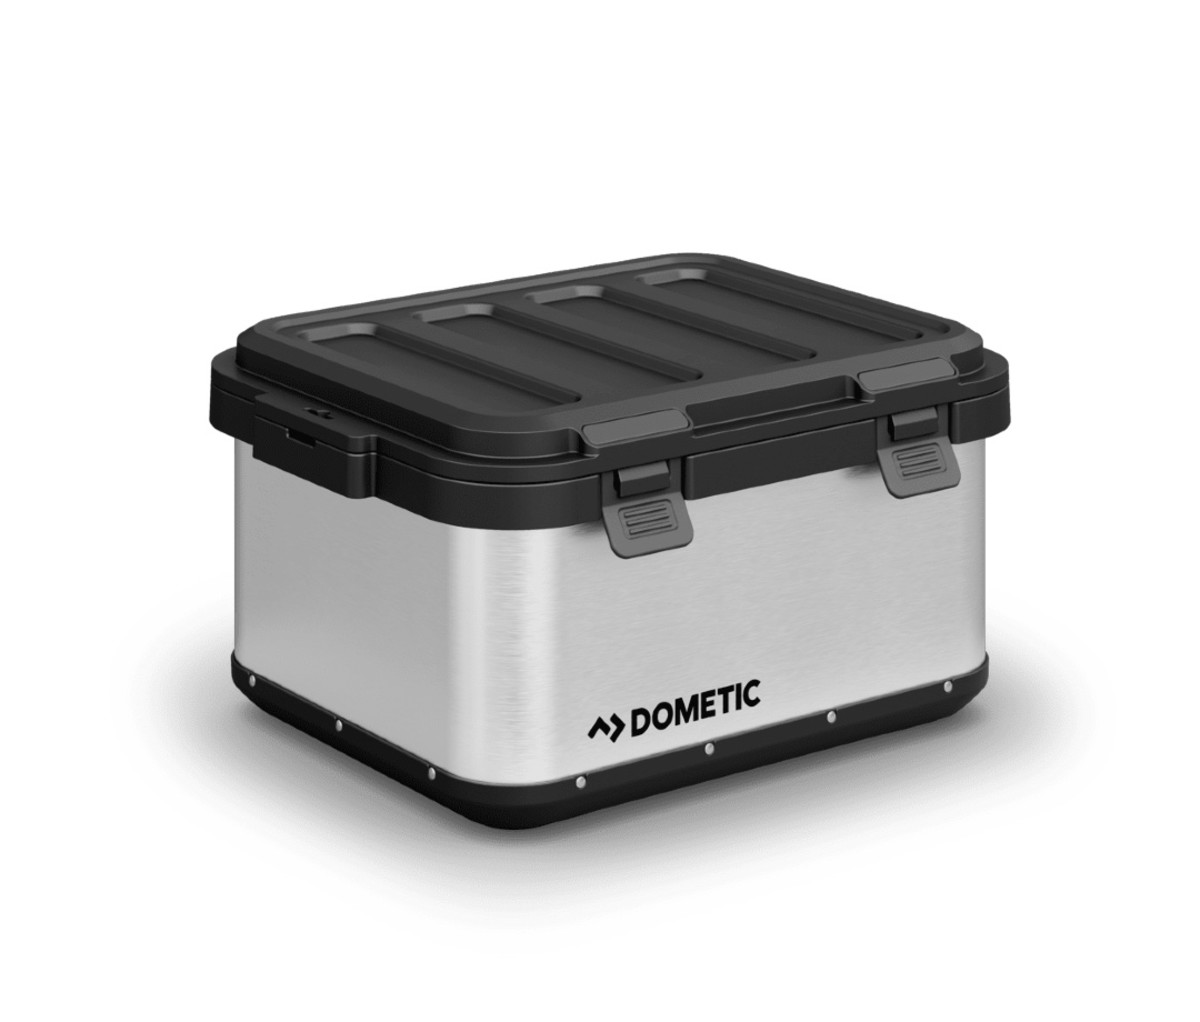 Safely store your gear in the Dometic Hard Storage case.